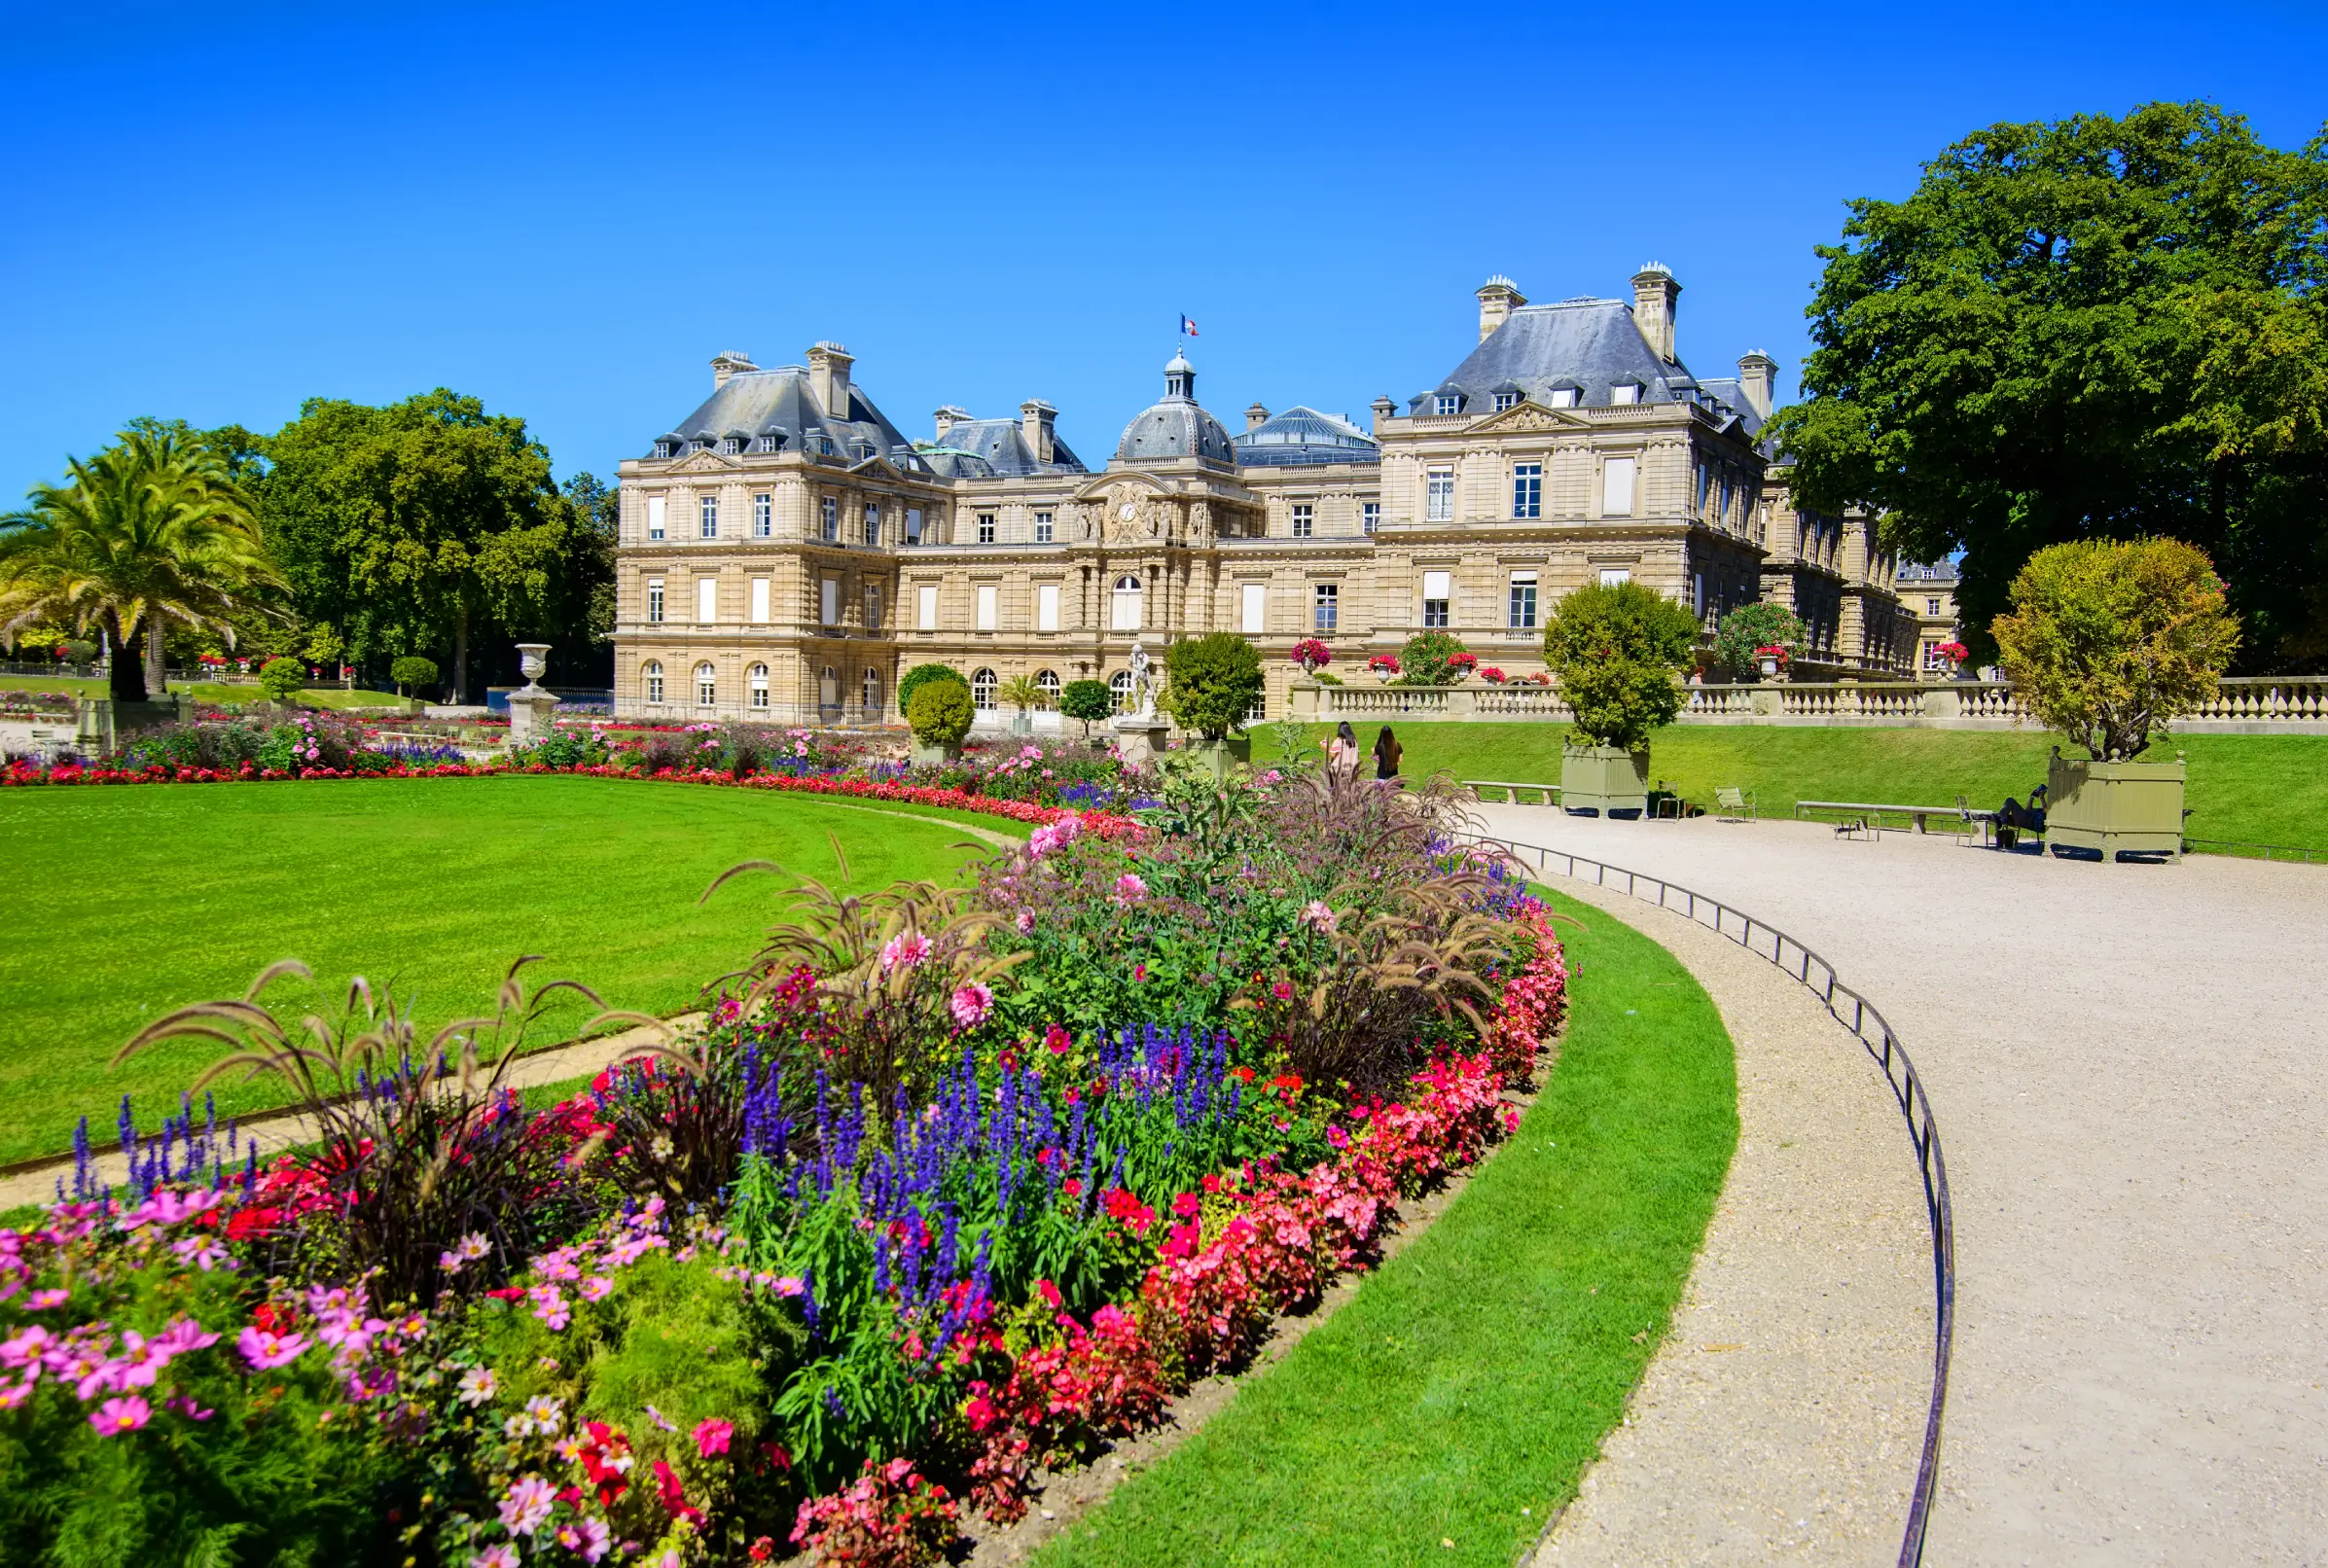 Luxembourg Gardens and explore Paris with our reliable cab service.